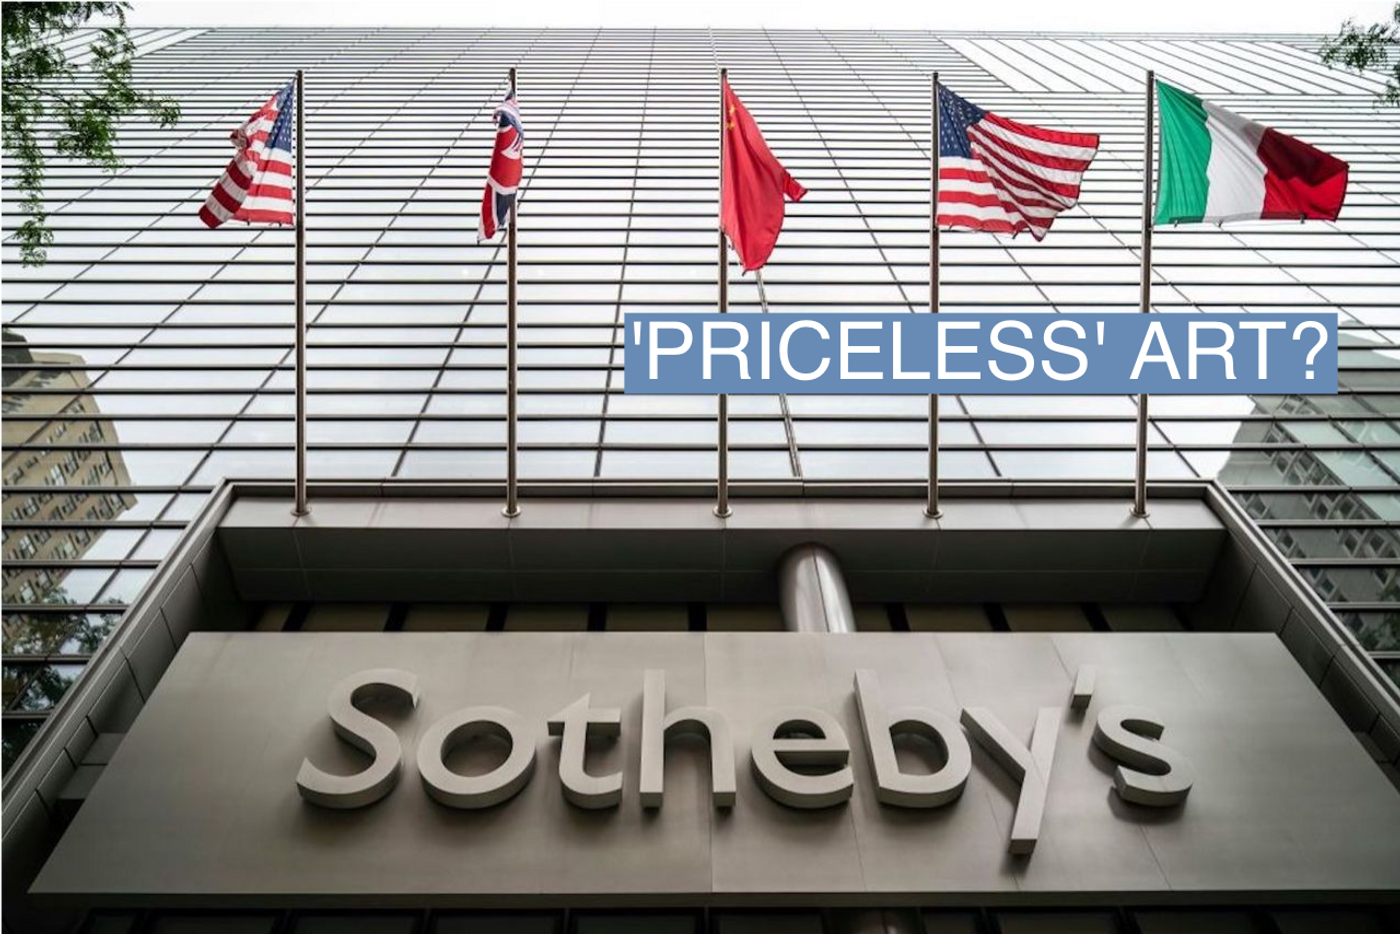 The Sotheby's headquarters stands on the Upper East Side in Manhattan, June 17, 2019 in New York City. The famed auction house is being purchased by telecommunications businessman Patrick Drahi for $3.7 billion. The company announced on Monday the deal, which returns Sotheby's to being a privately held company after 31 years on the New York Stock Exchange. 